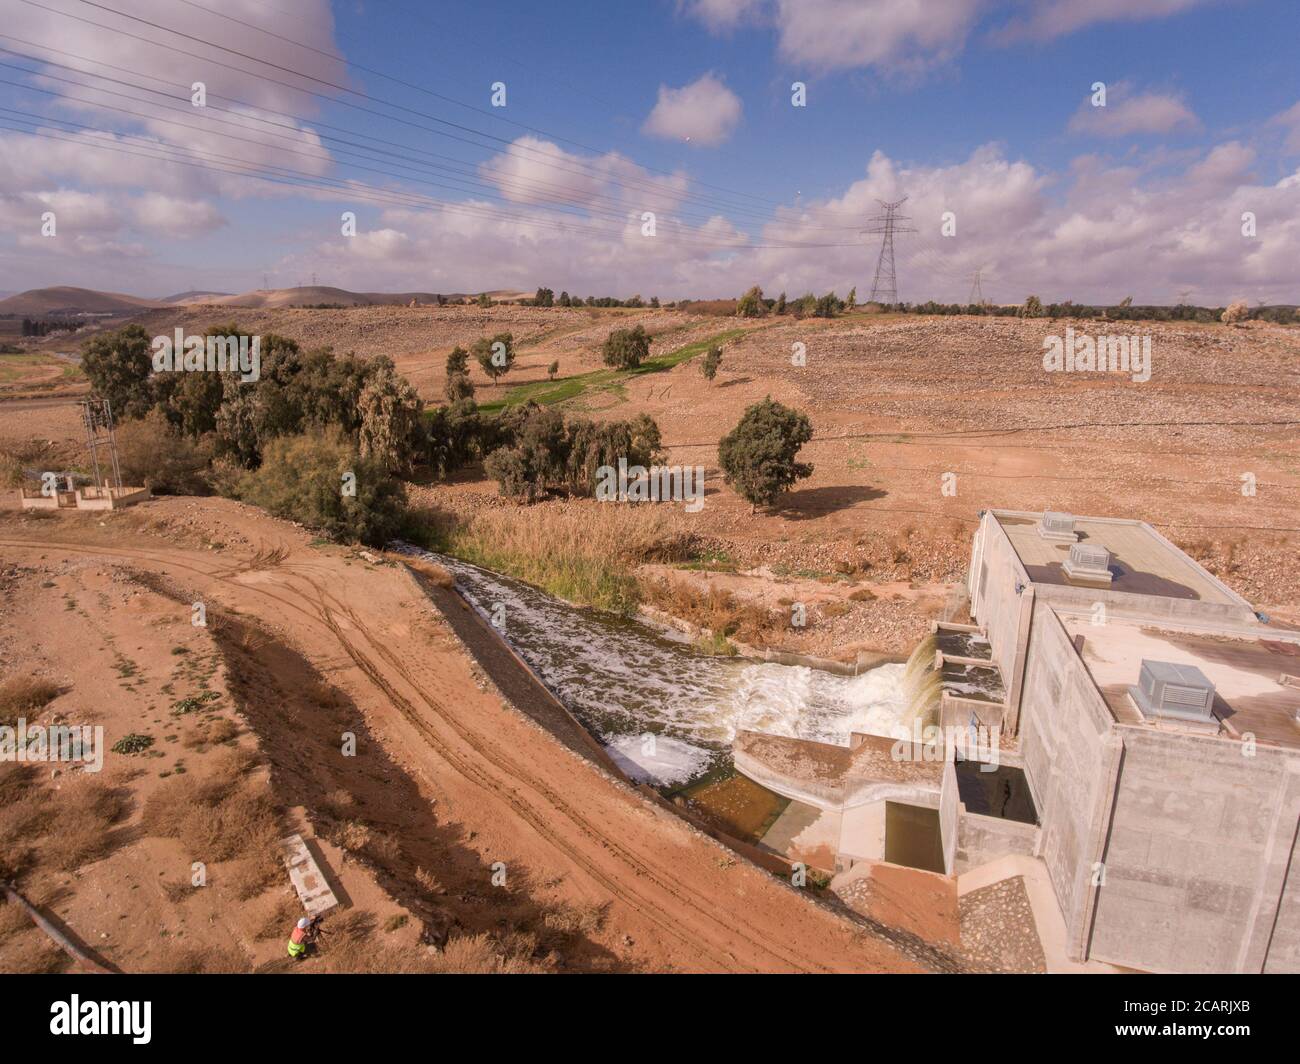 Clean, treated water flows from the As-Samra wastewater treatment plant in Zarqa, Jordan. Stock Photo